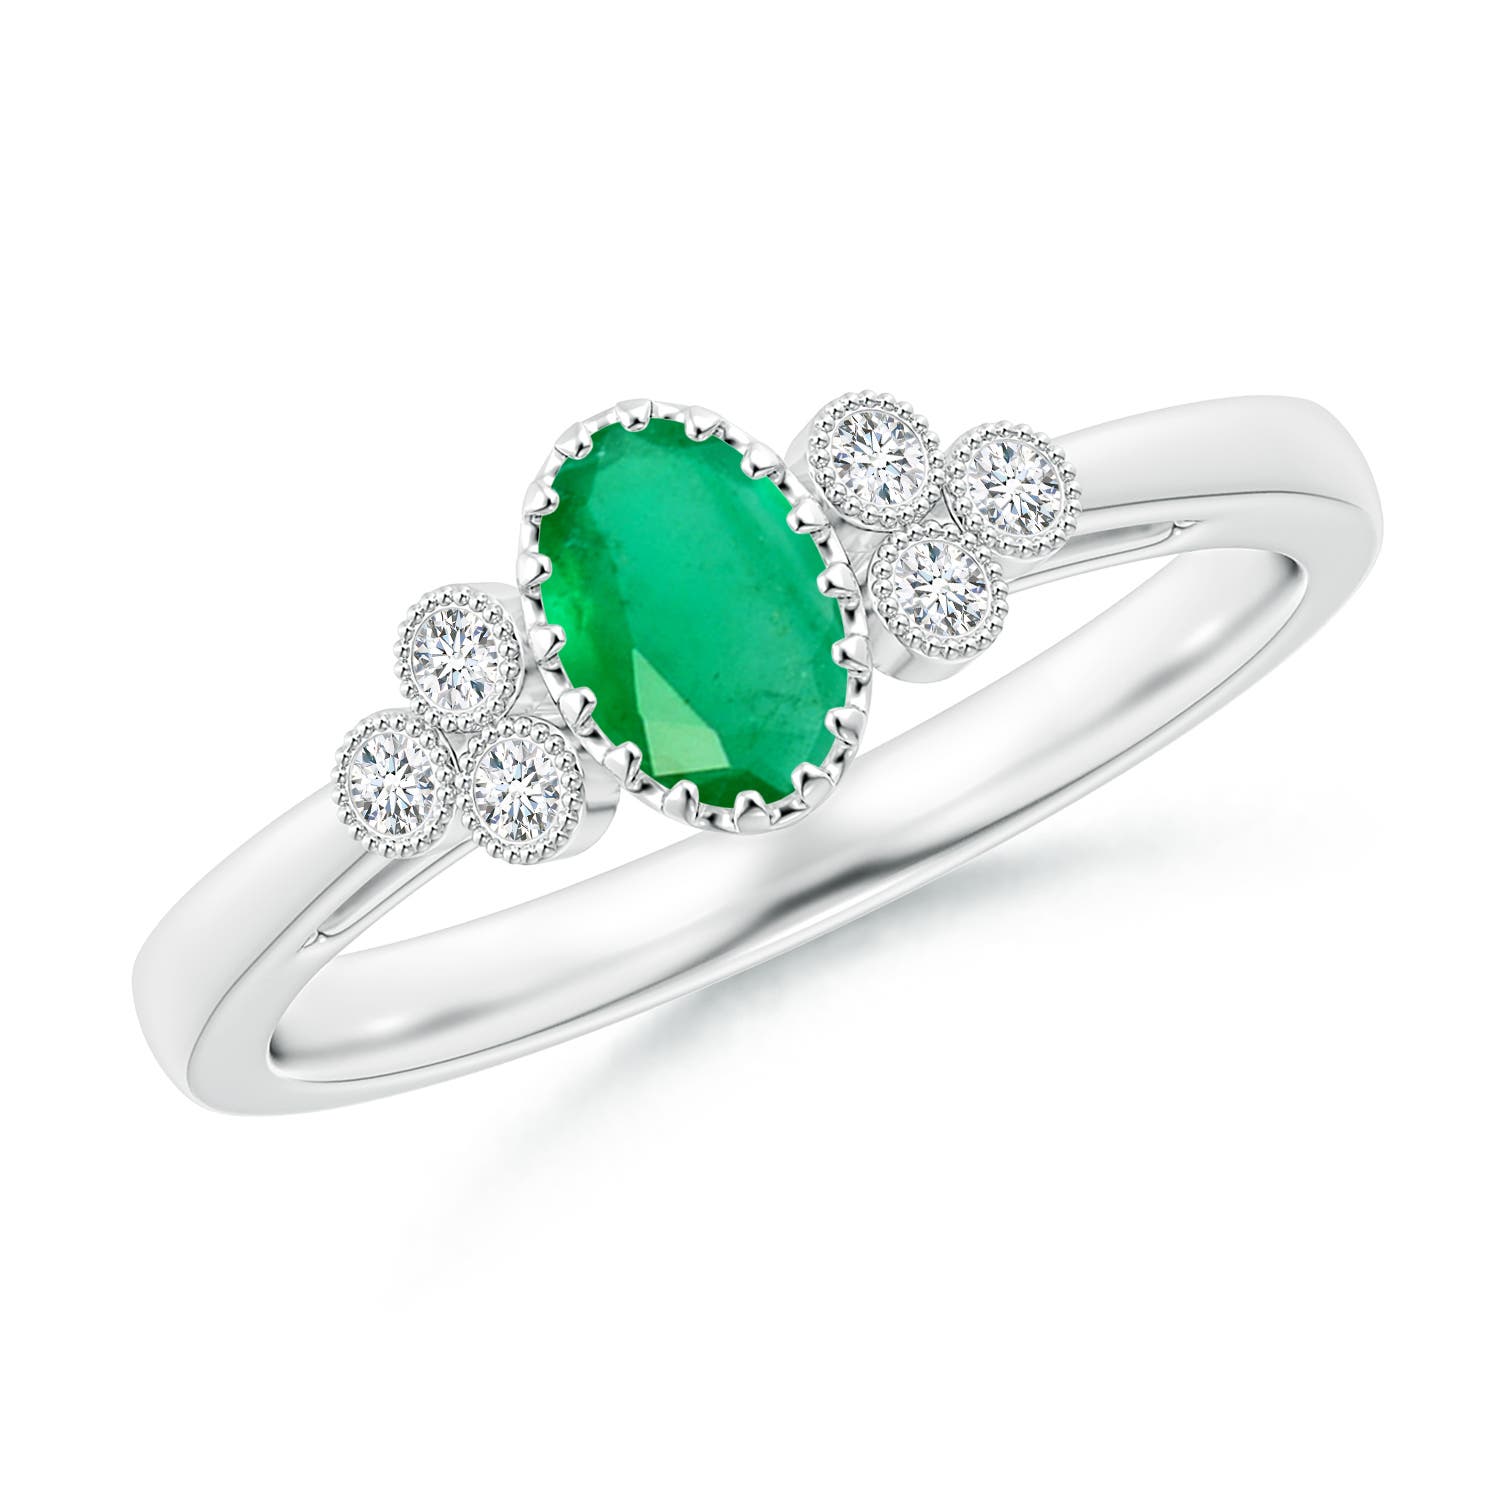 A - Emerald / 0.48 CT / 14 KT White Gold